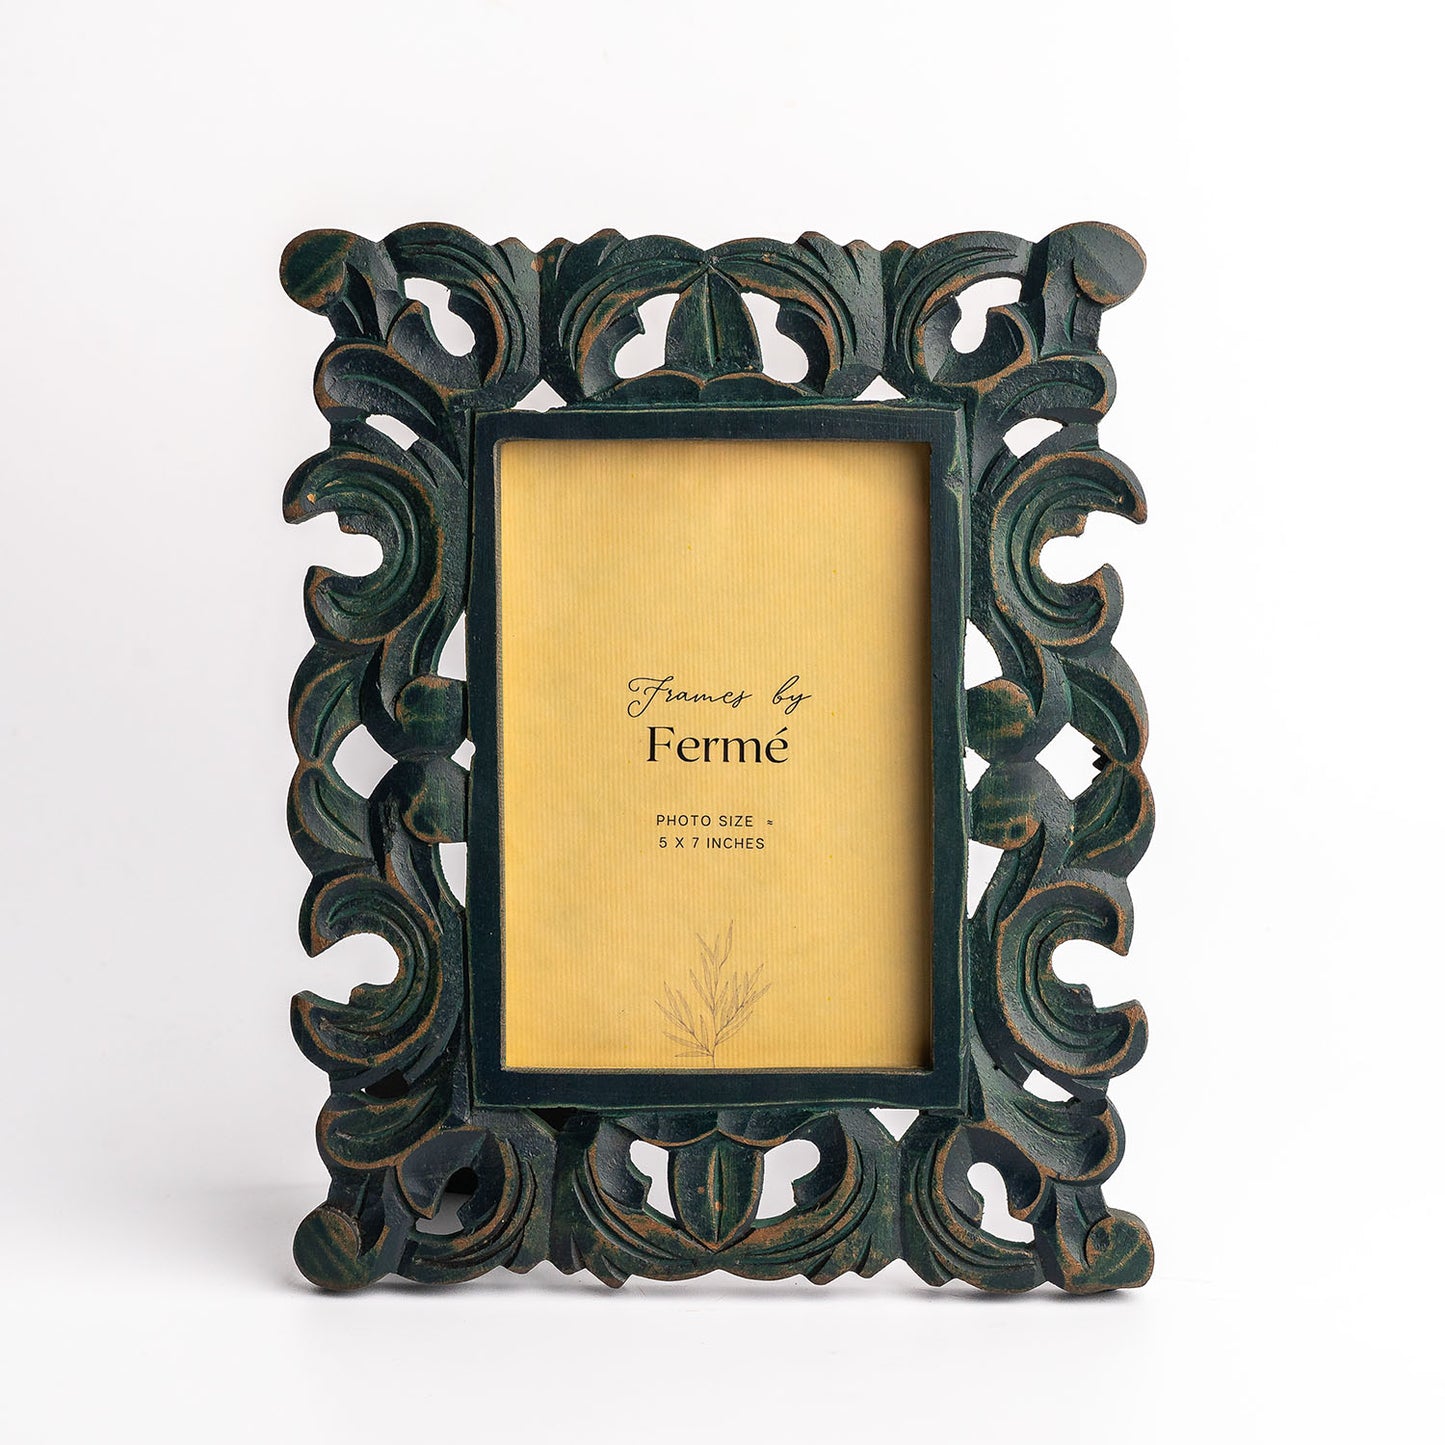 Natural Opulence: Handcrafted Green Carved Wooden Photo Frame, Radiating Artistry and Charm